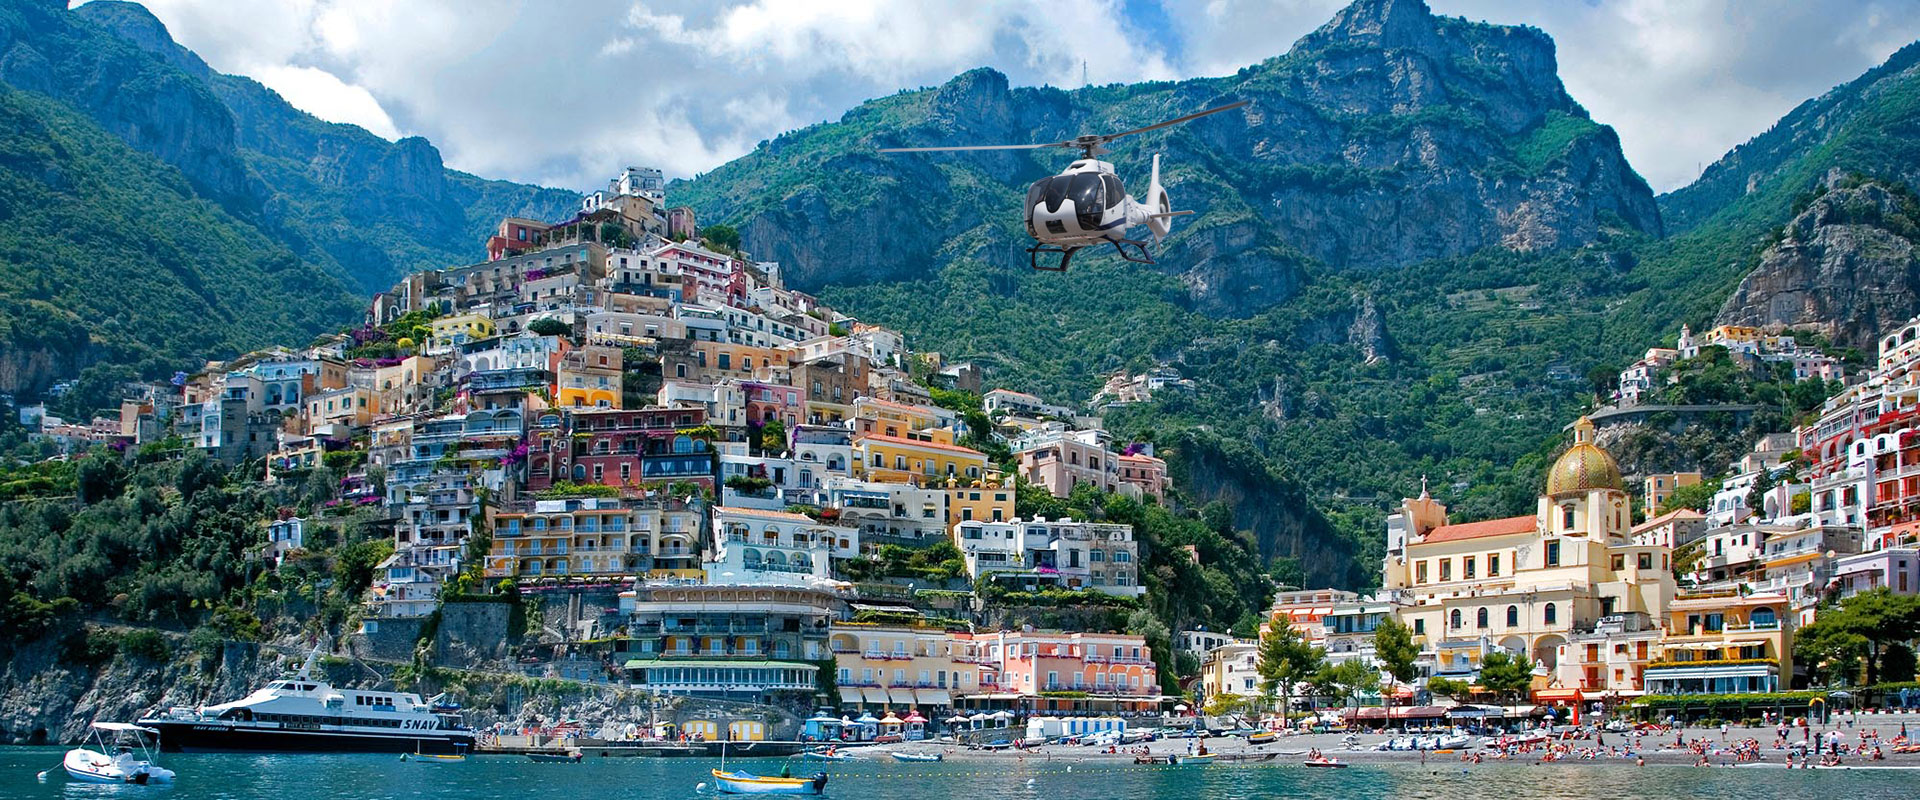 Rental Helicopters Naples